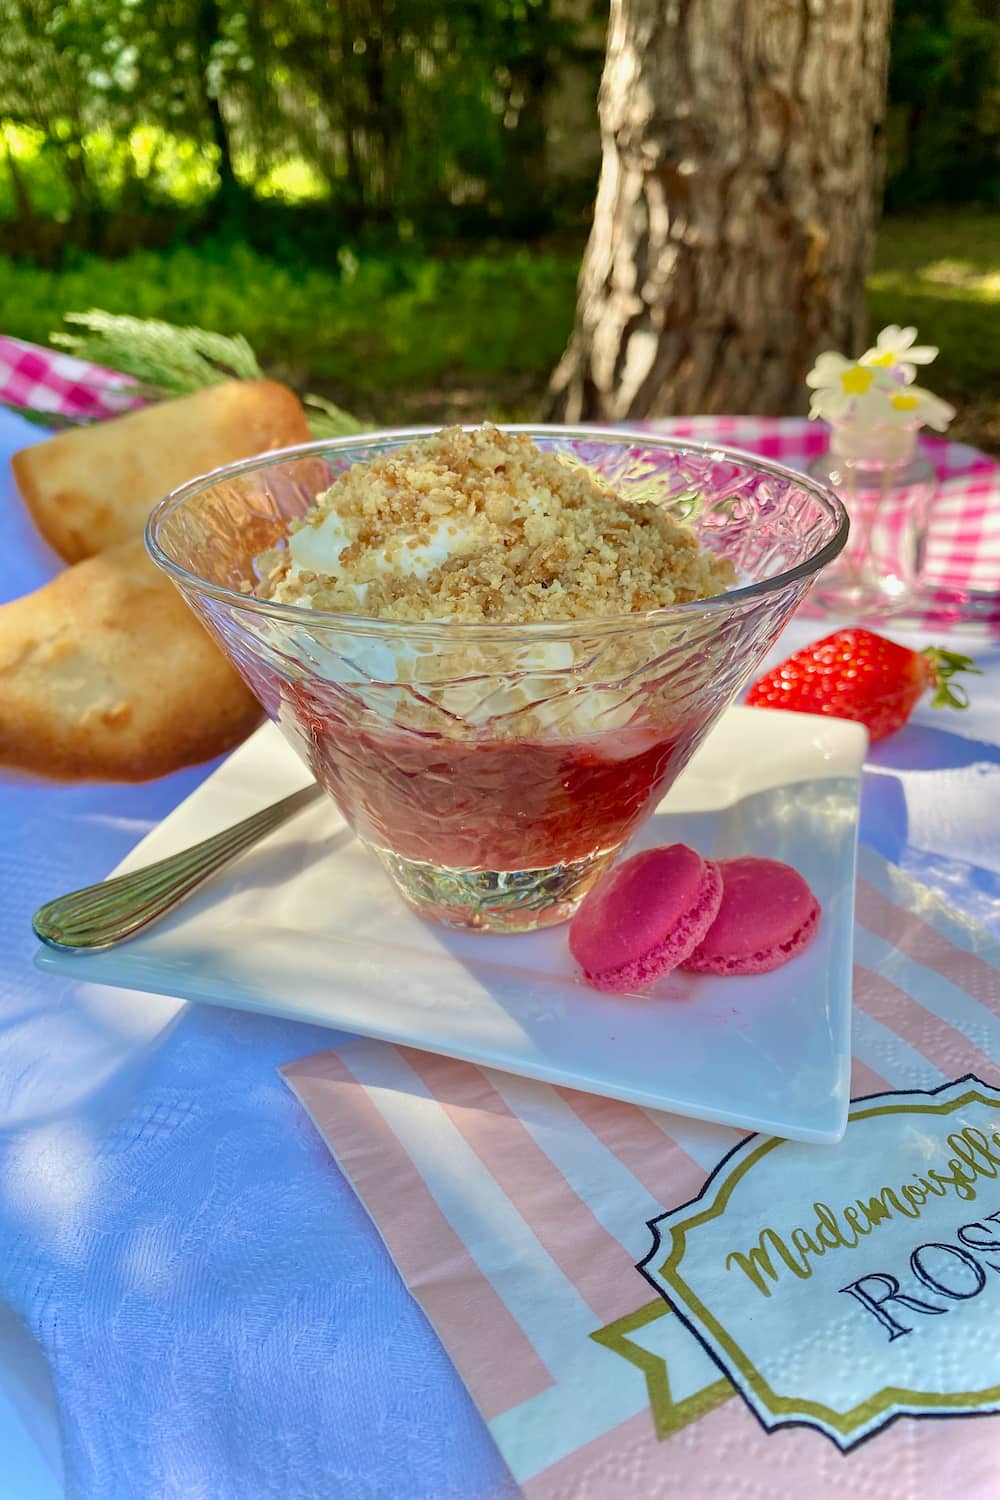 strawberry rhubarb crunchy crumble with rose